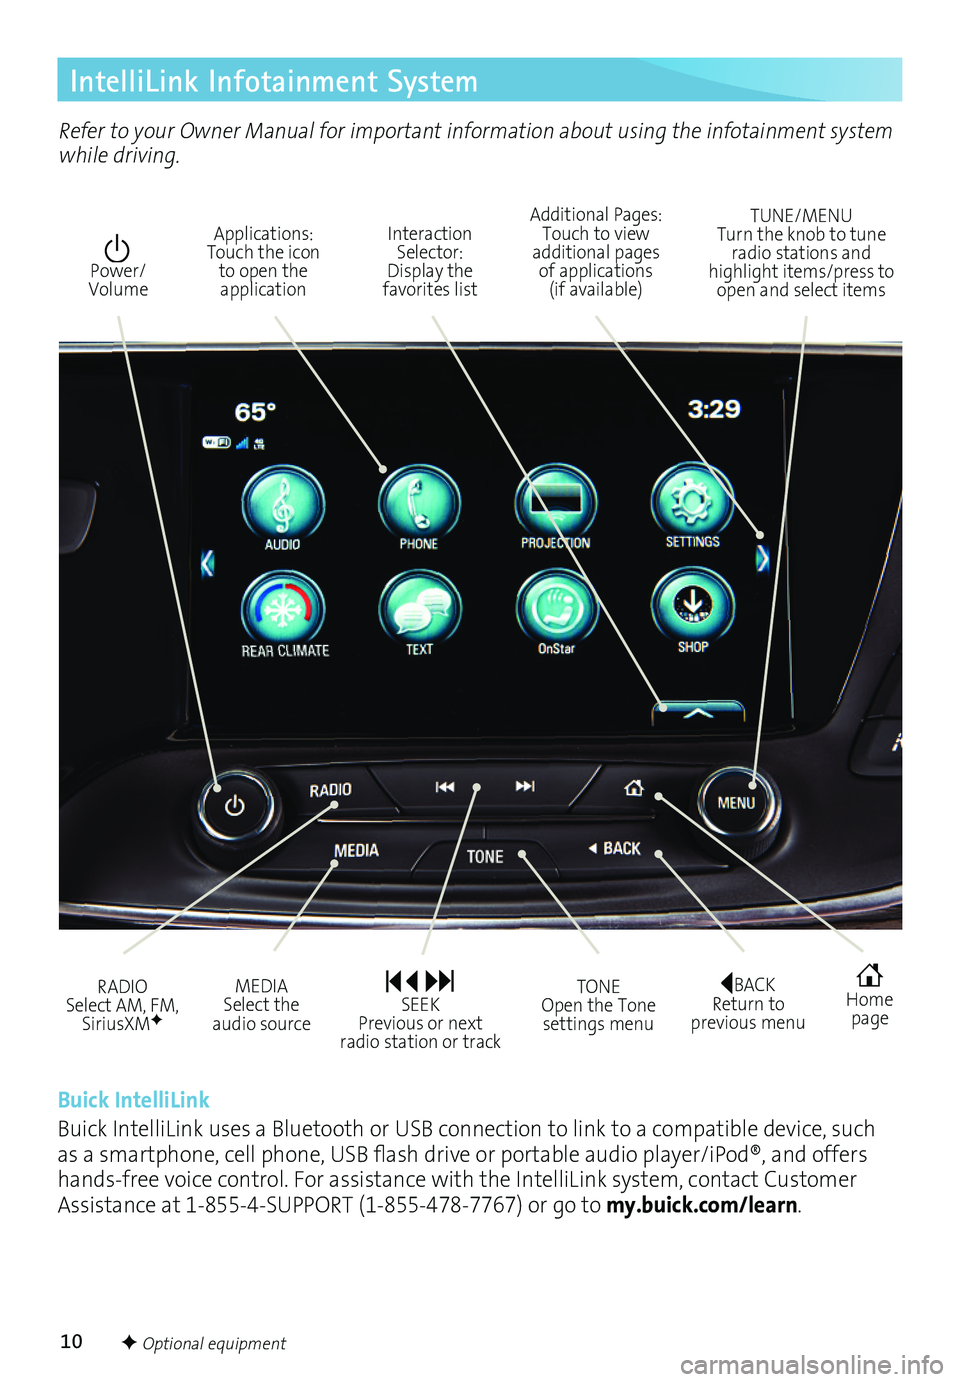 BUICK ENVISION 2017  Get To Know Guide 10
IntelliLink Infotainment System
Interaction Selector:  Display the favorites list
TUNE/MENU Turn the knob to tune radio stations and highlight items/press to open and select items
Applications: Tou